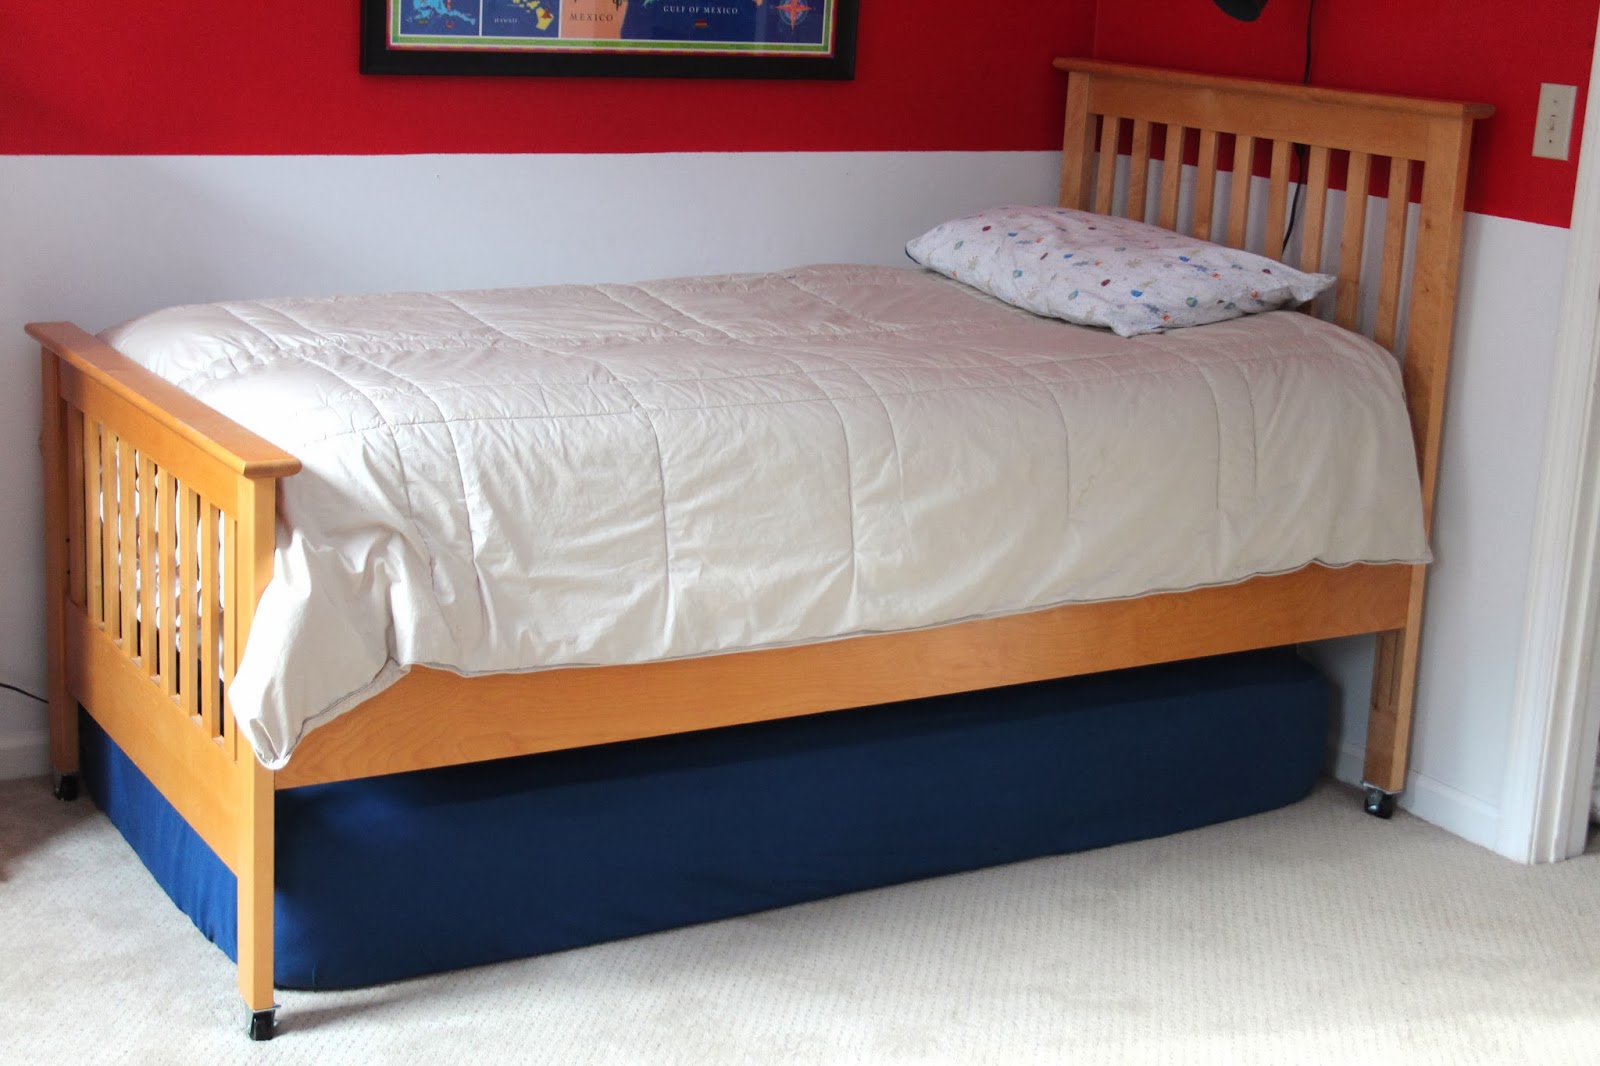 bed boards for under mattress uk